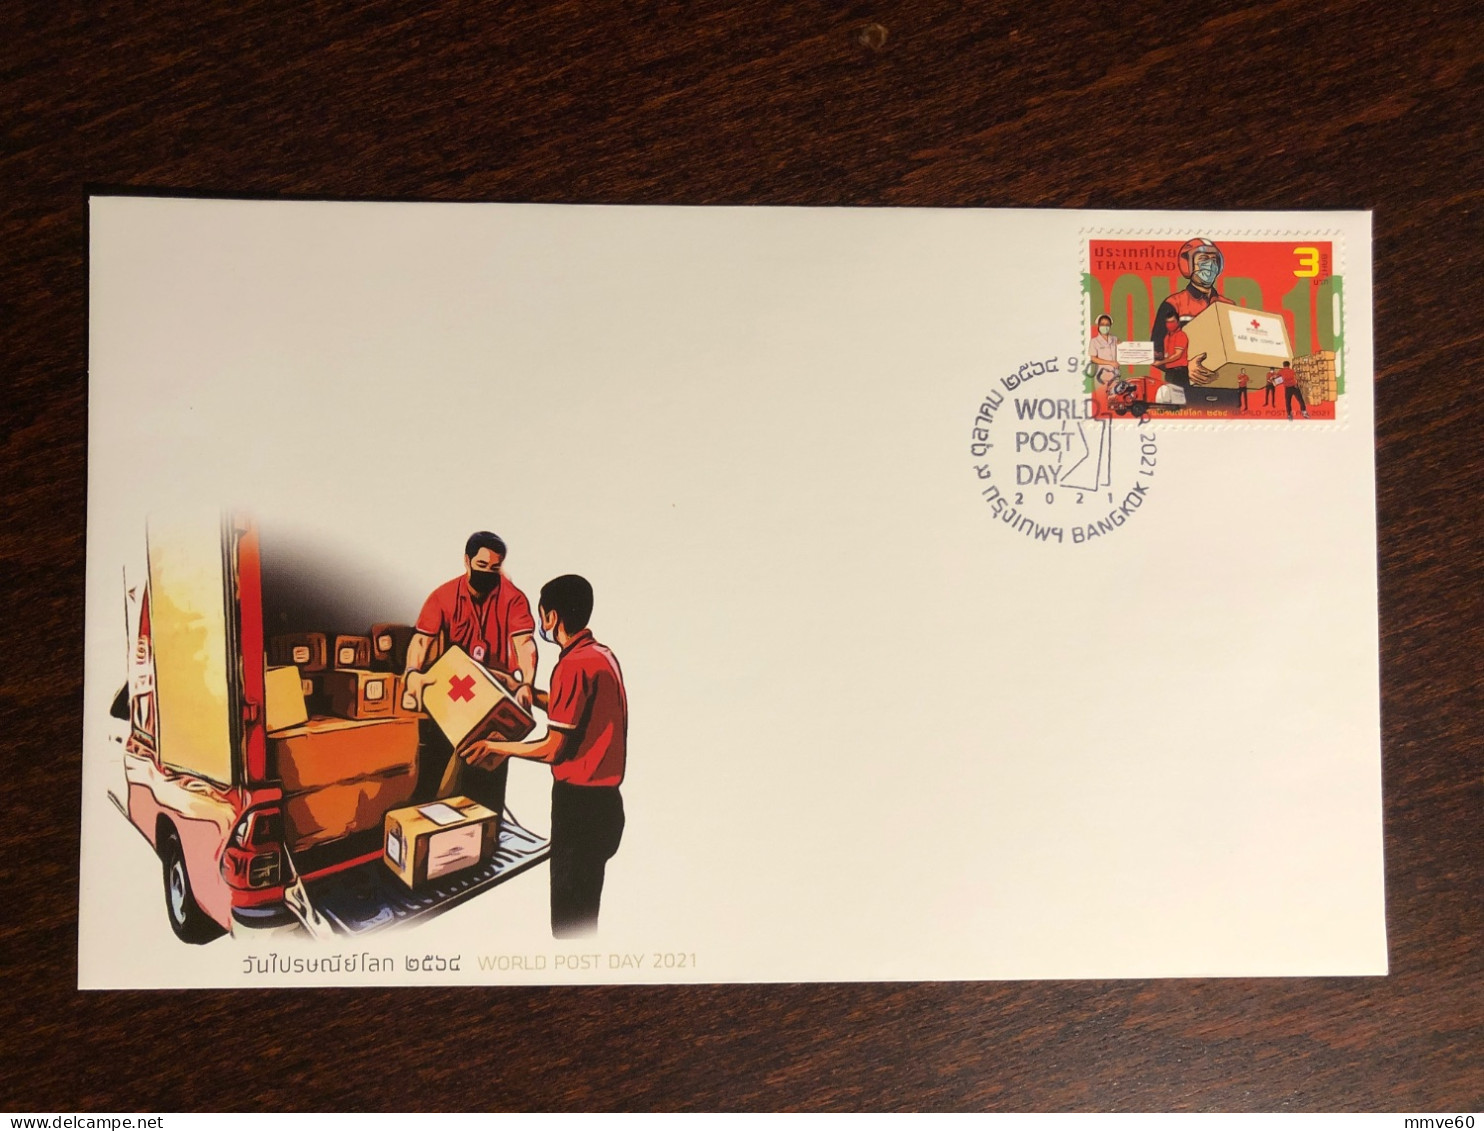 THAILAND FDC COVER 2021 YEAR COVID RED CROSS HEALTH MEDICINE STAMPS - Thaïlande